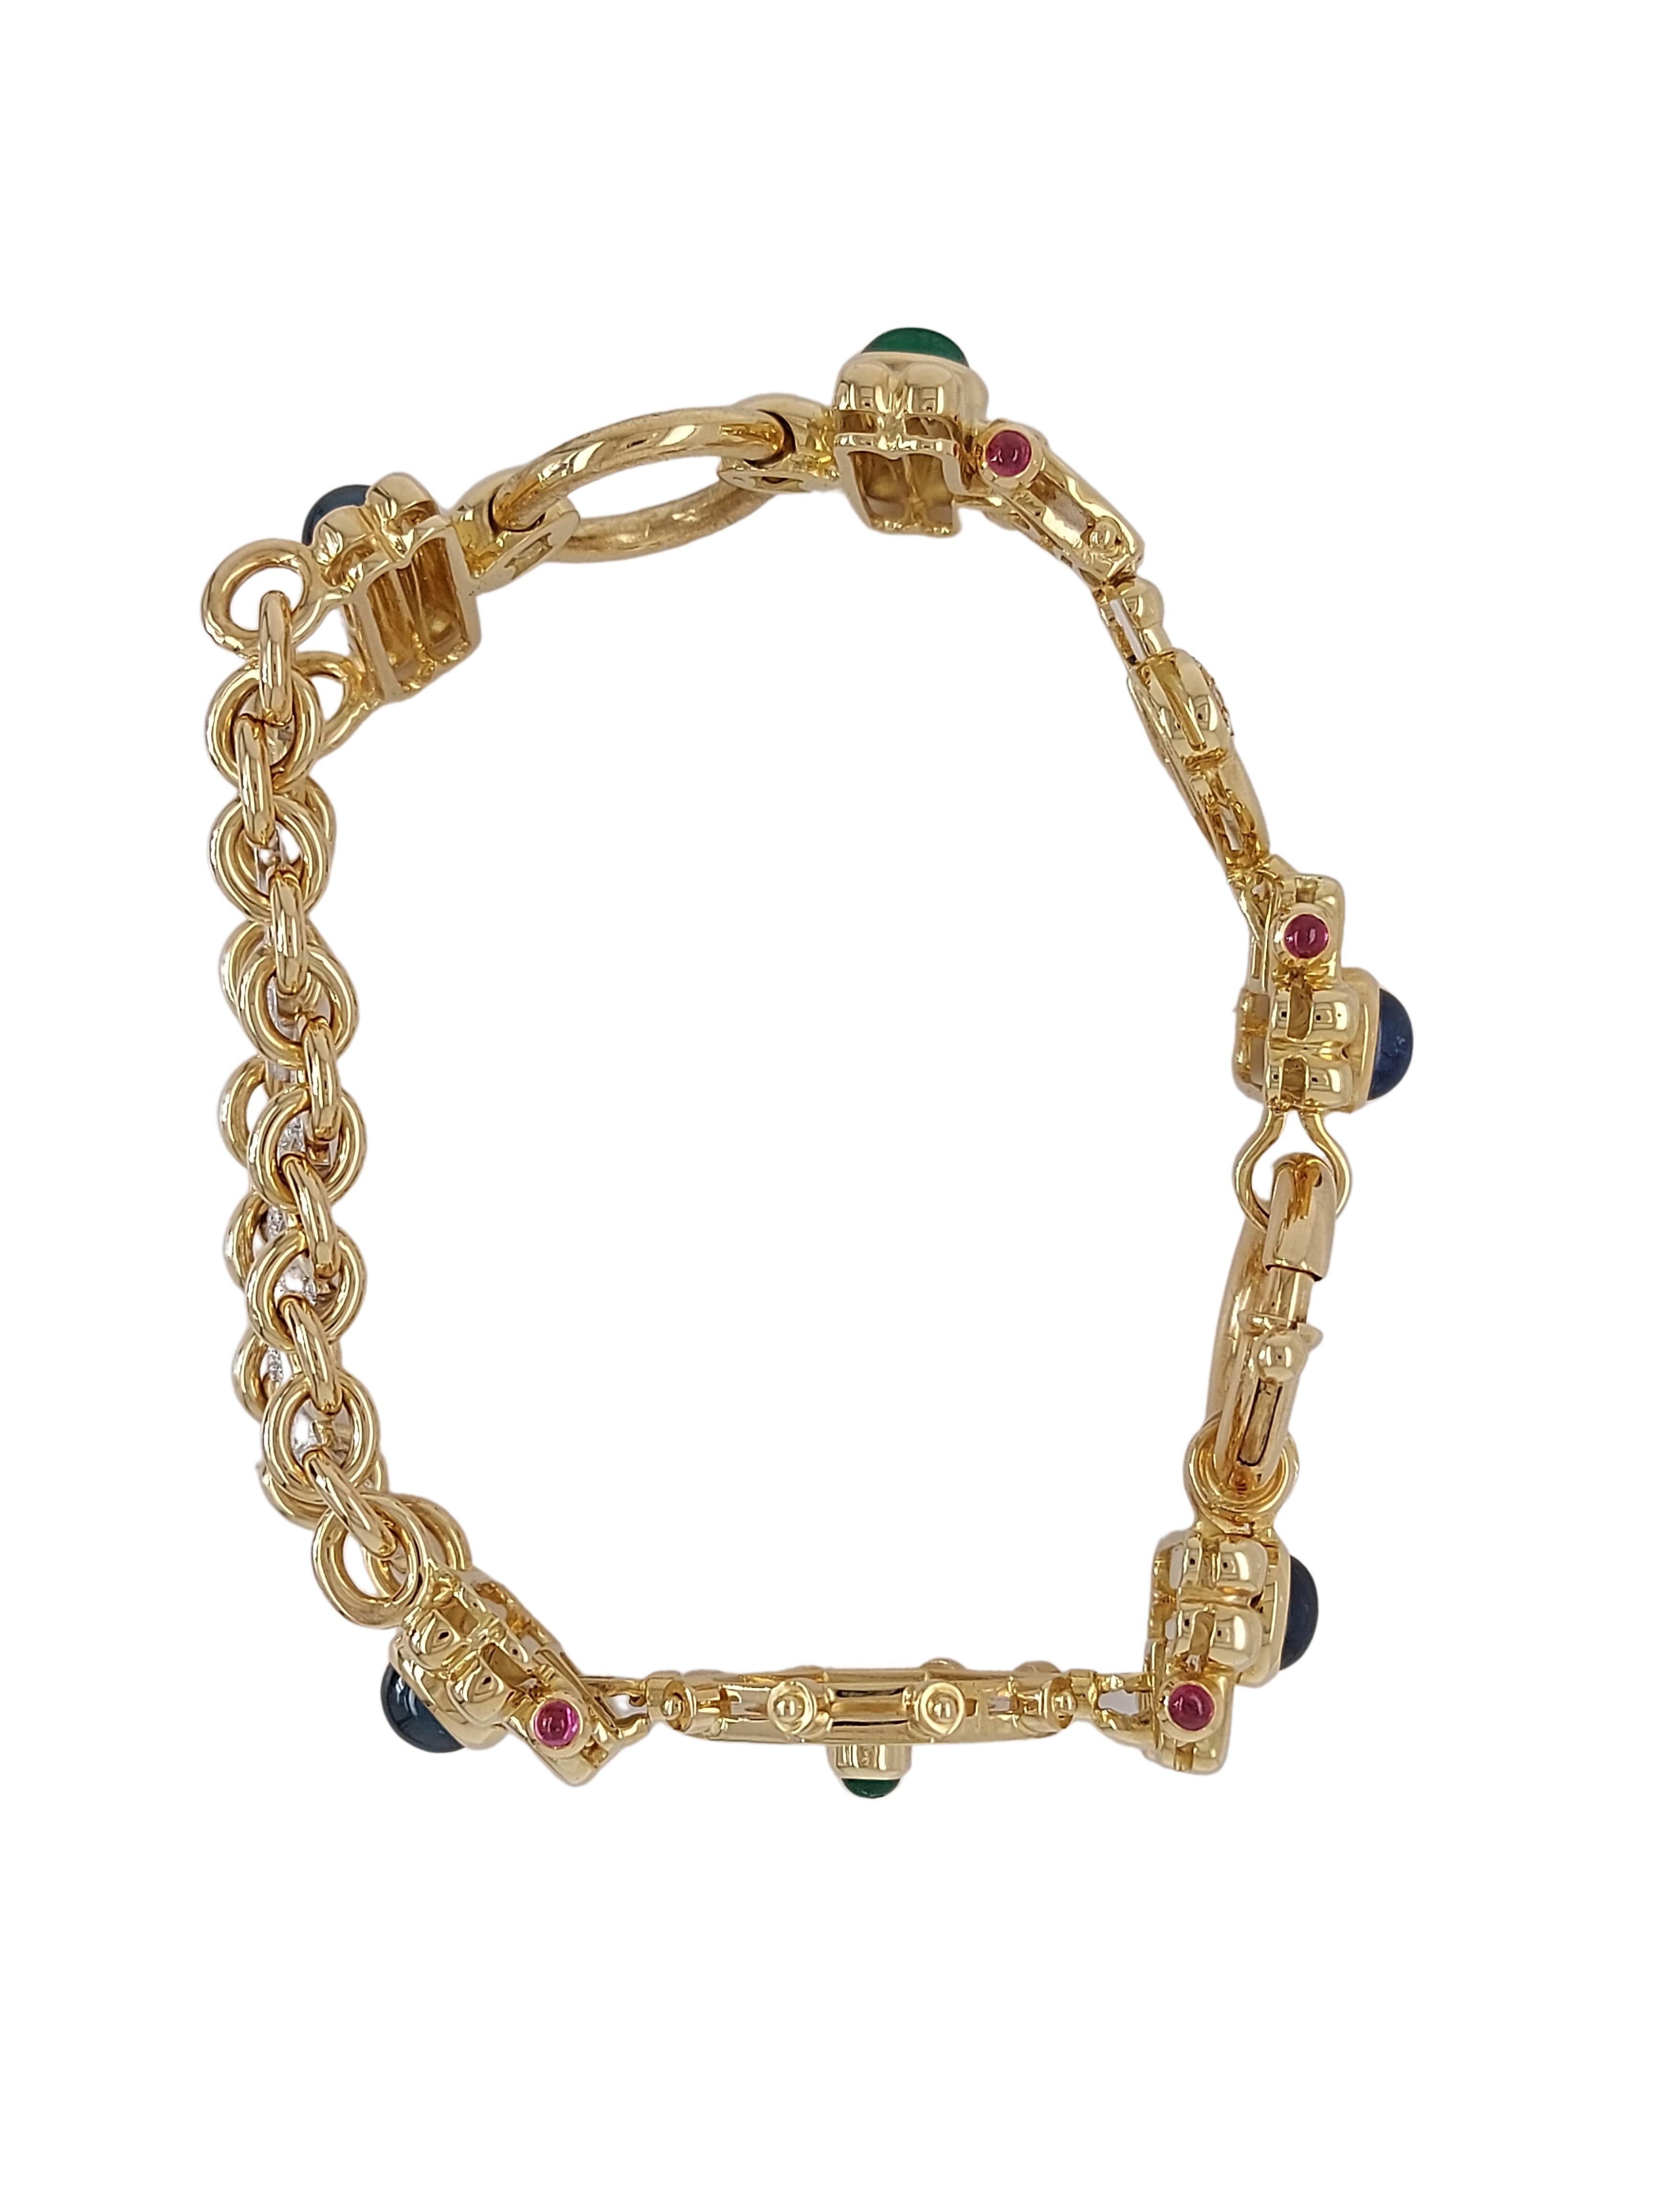 Emerald Cut Mouawad 18kt Yellow Gold Fortune Bracelet with Diamonds, Sapphires, Emeralds For Sale